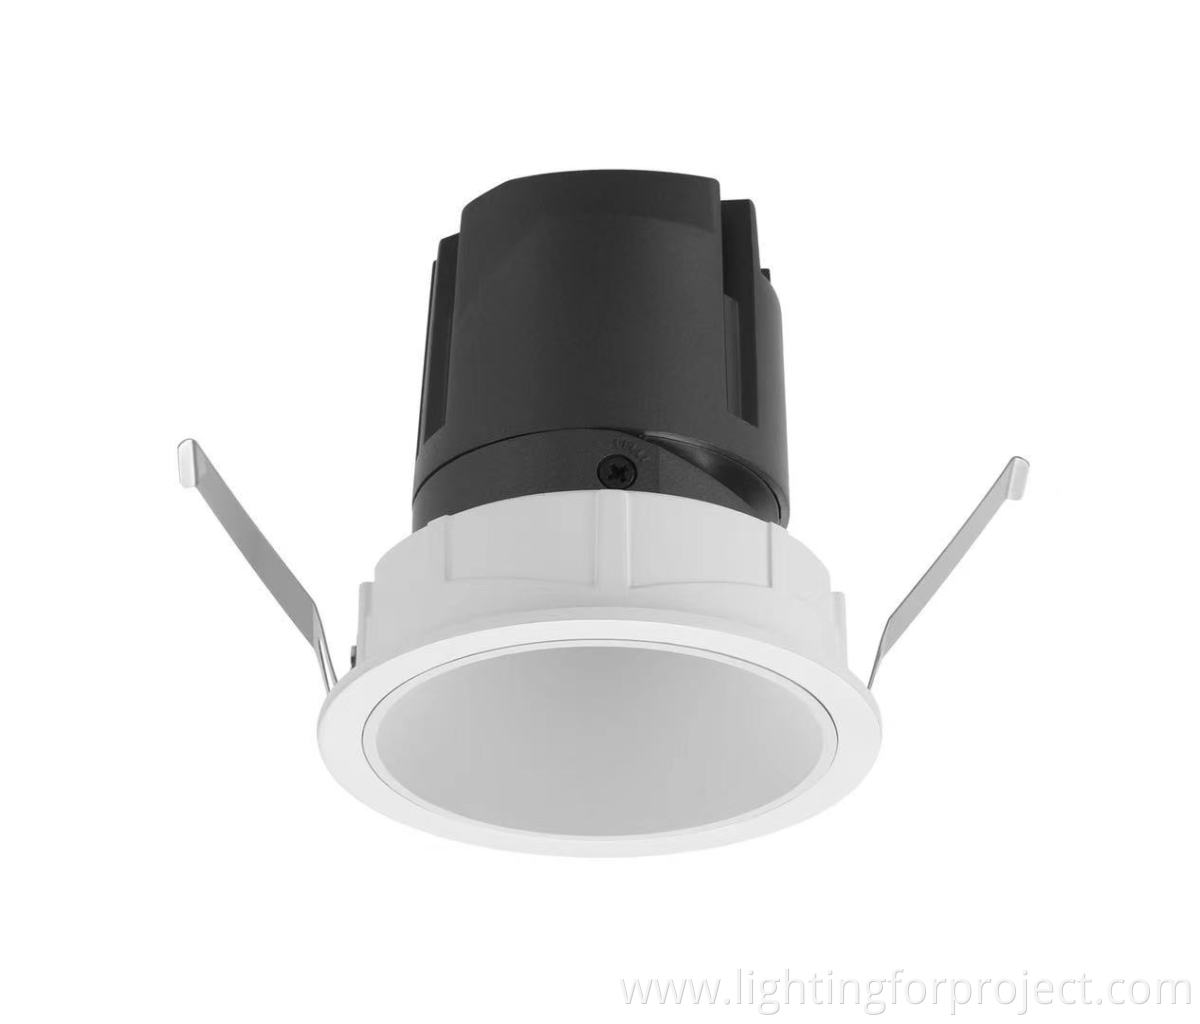 HSONG New Design Die Casting alumium 10W 20W Recessed Led Spotlight for Office Hotel